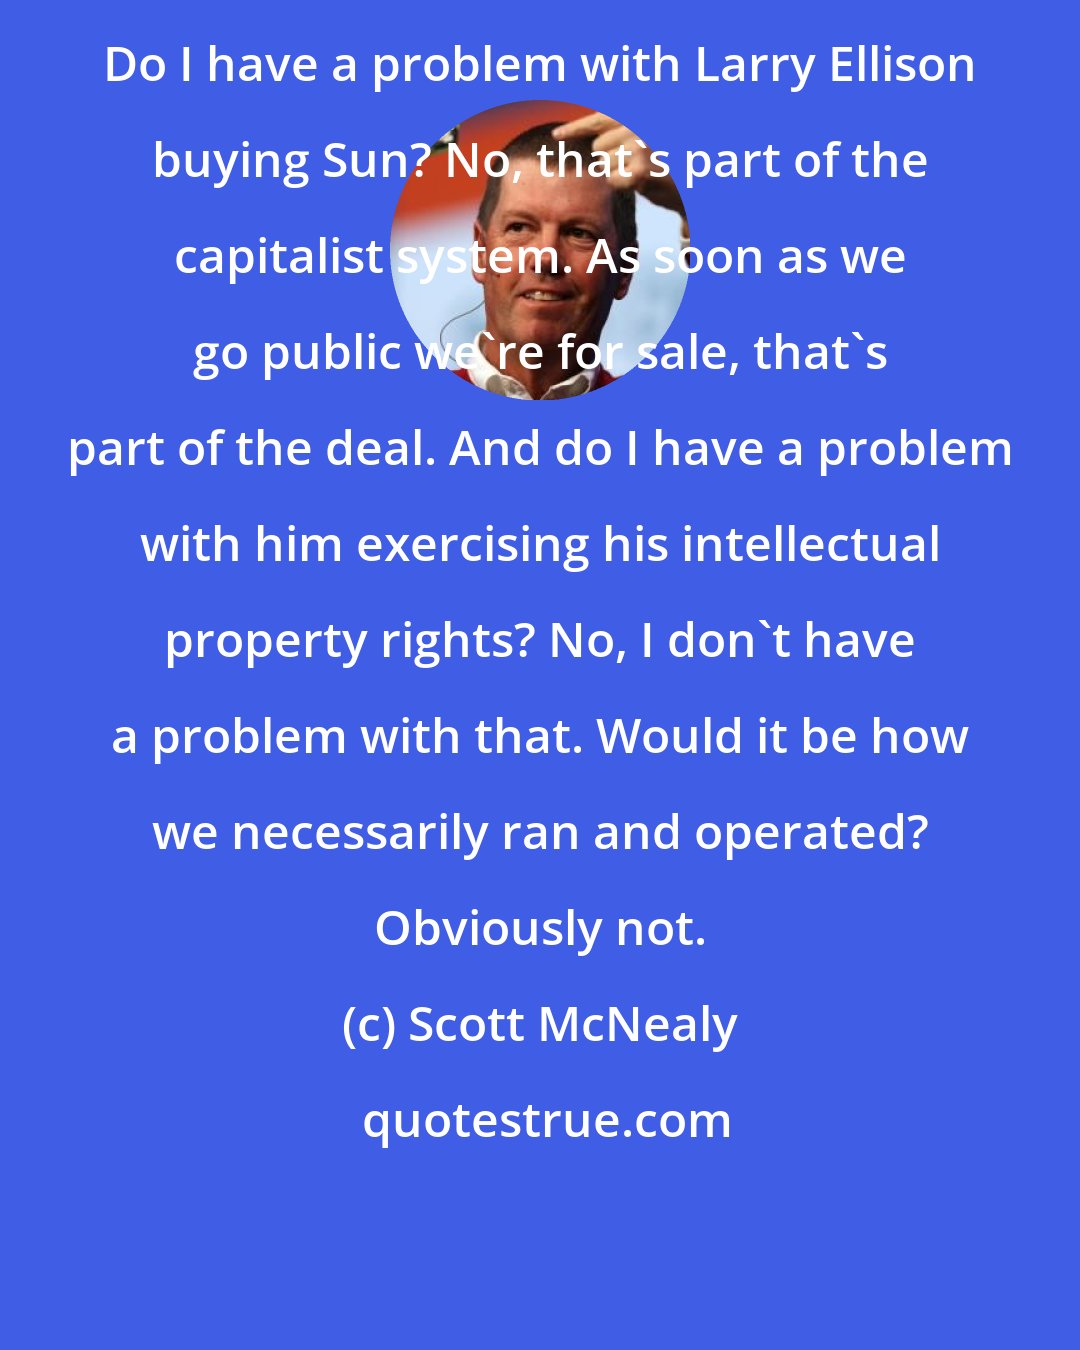 Scott McNealy: Do I have a problem with Larry Ellison buying Sun? No, that's part of the capitalist system. As soon as we go public we're for sale, that's part of the deal. And do I have a problem with him exercising his intellectual property rights? No, I don't have a problem with that. Would it be how we necessarily ran and operated? Obviously not.